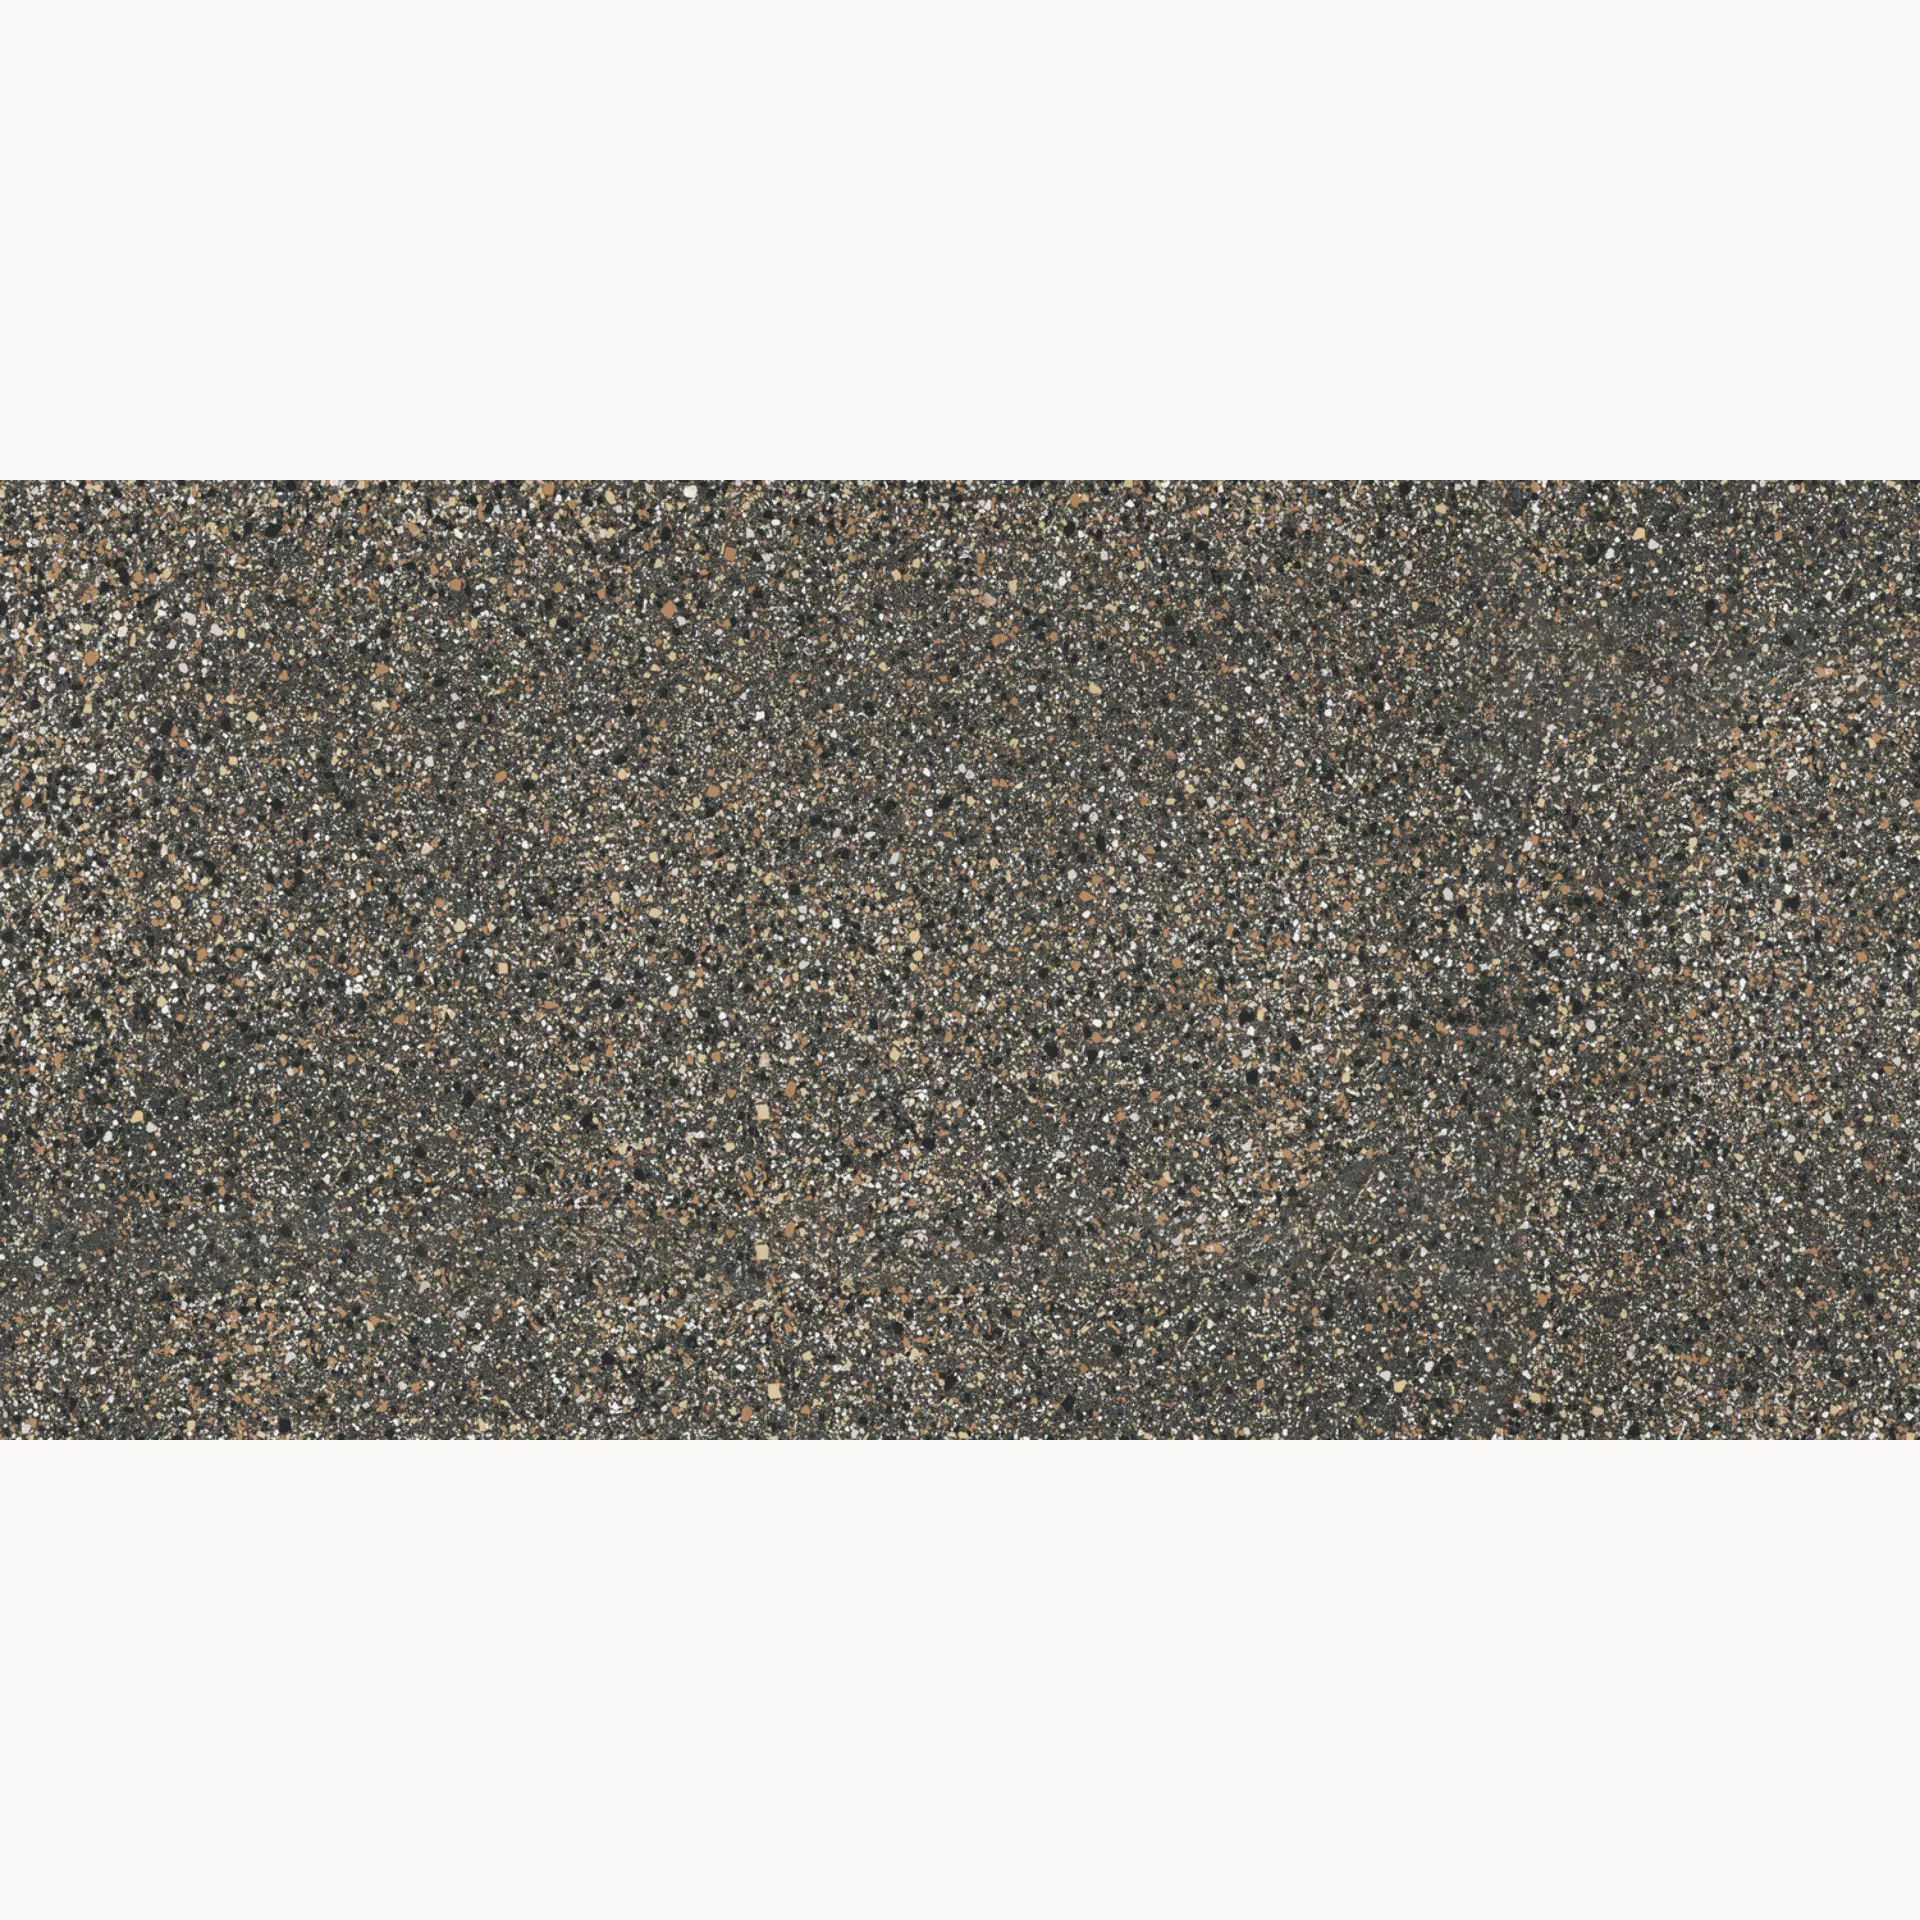 FMG Rialto Earth Naturale P175426 75x150cm rectified 10mm